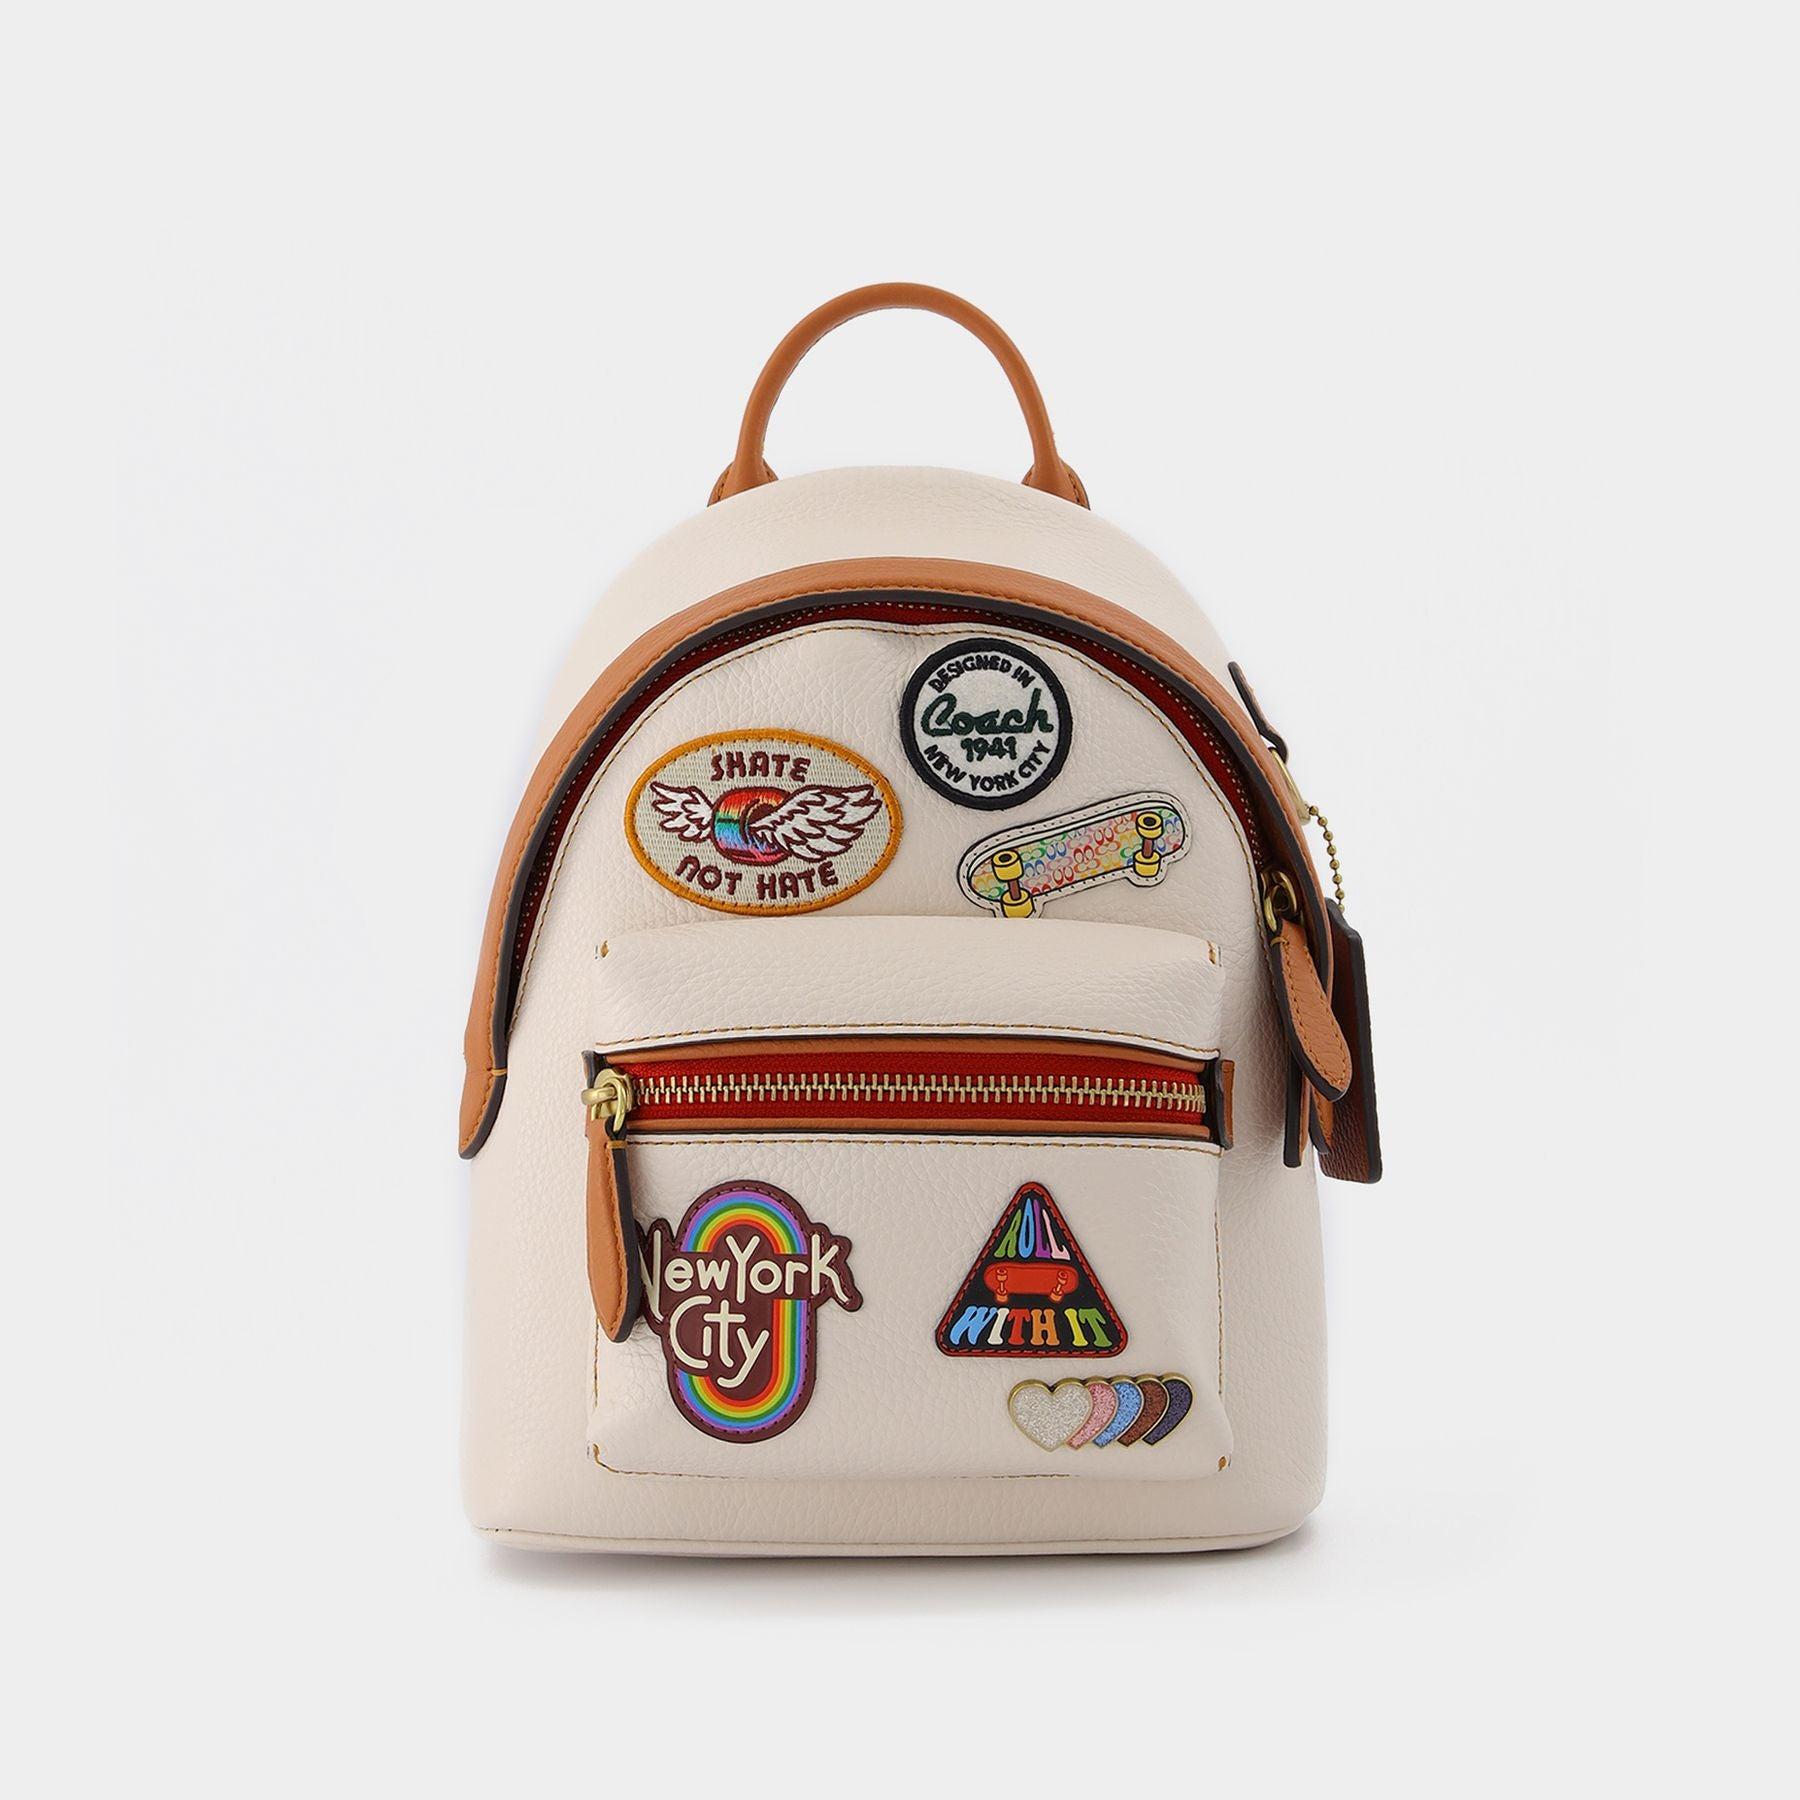 Coach Men's Patches Backpack, Men's Fashion, Bags, Backpacks on